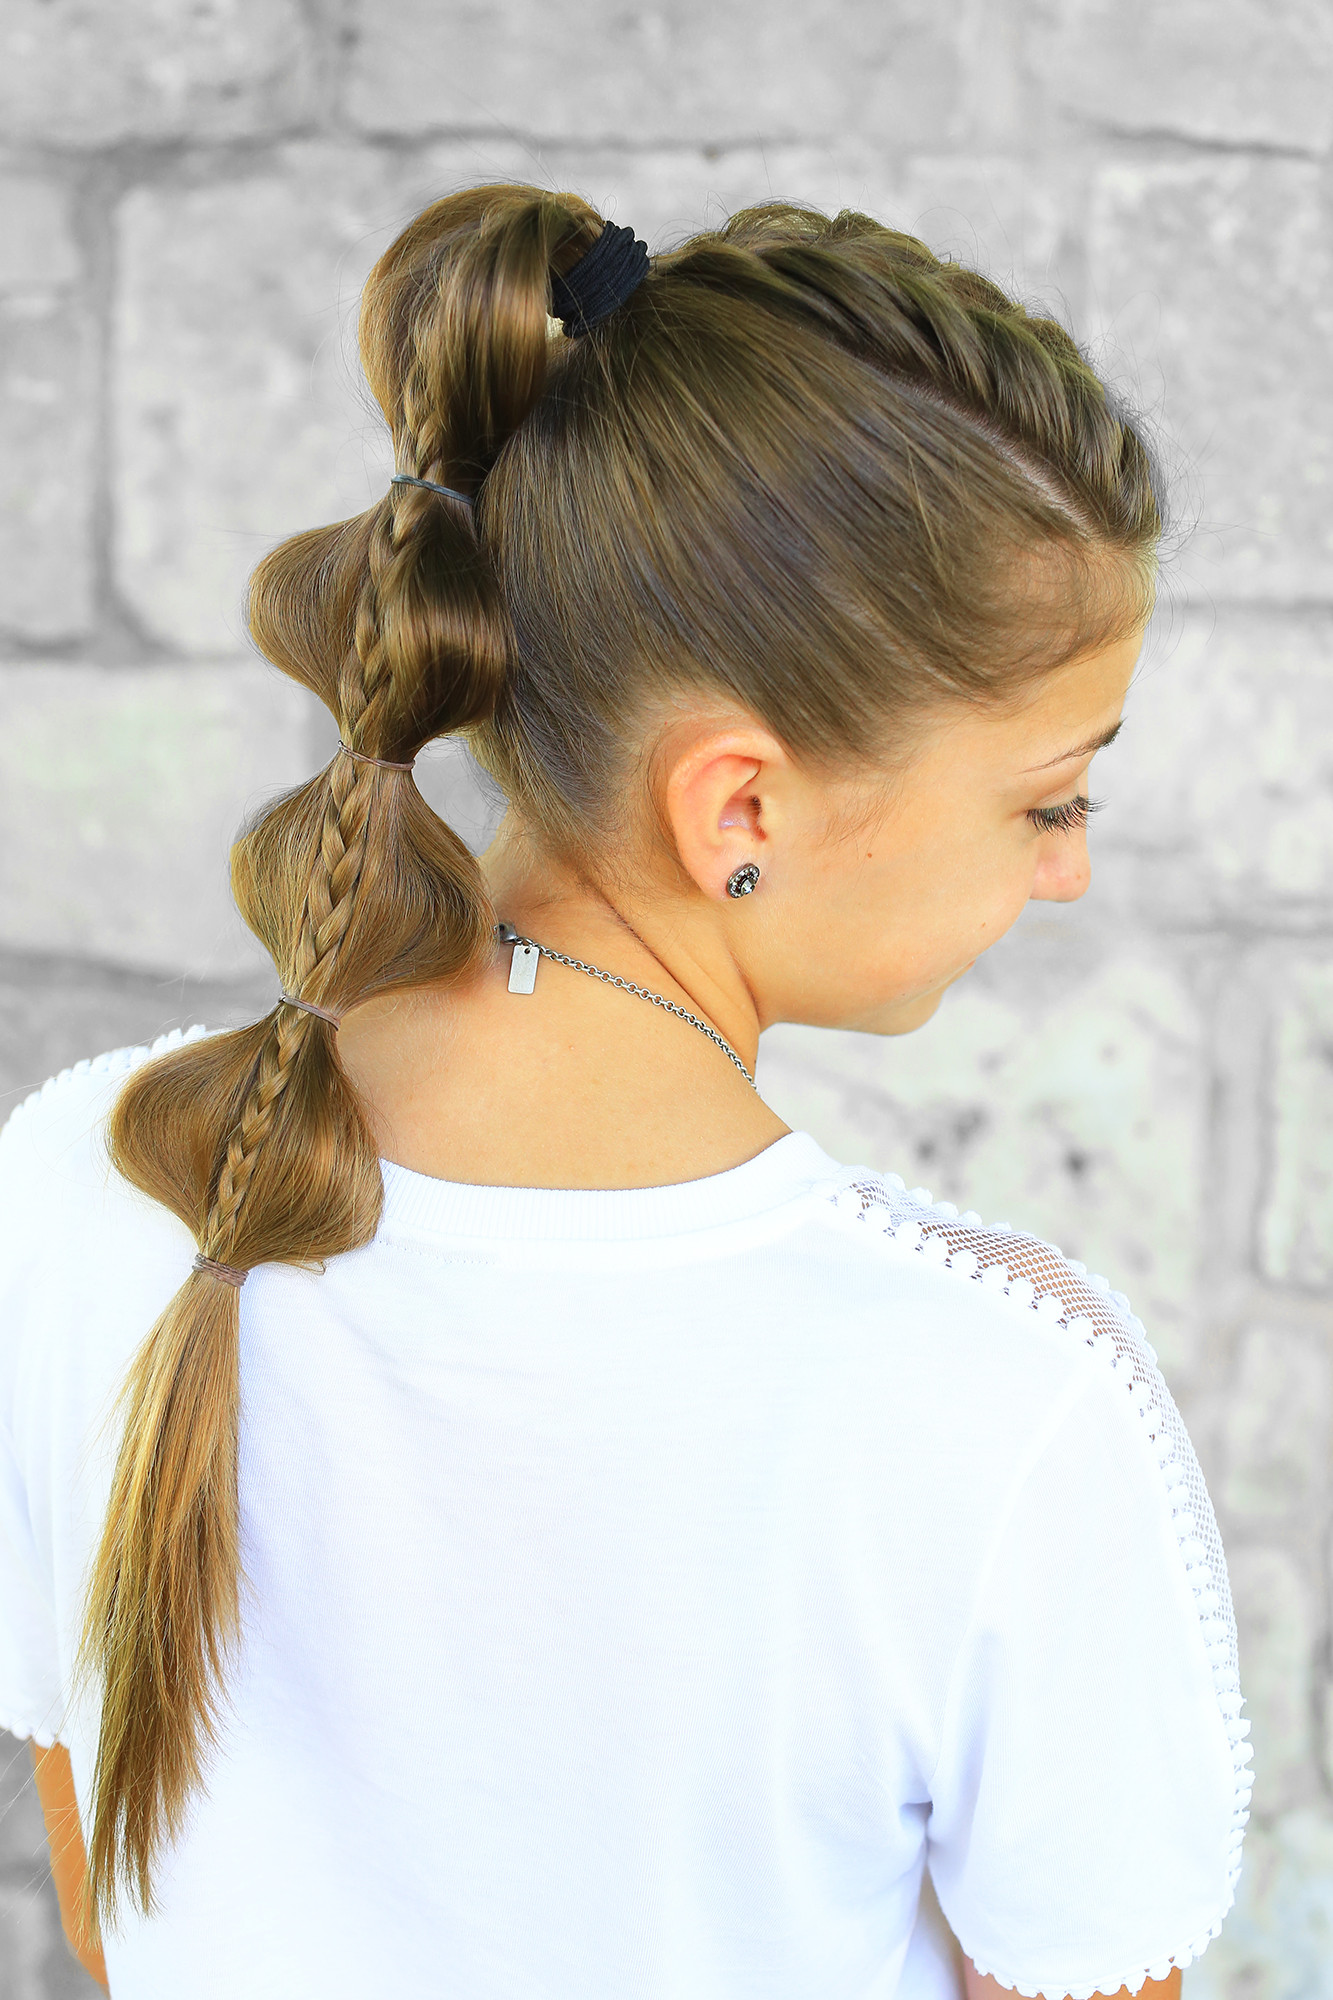 Girls Hair Cut Styles
 Stacked Bubble Braid